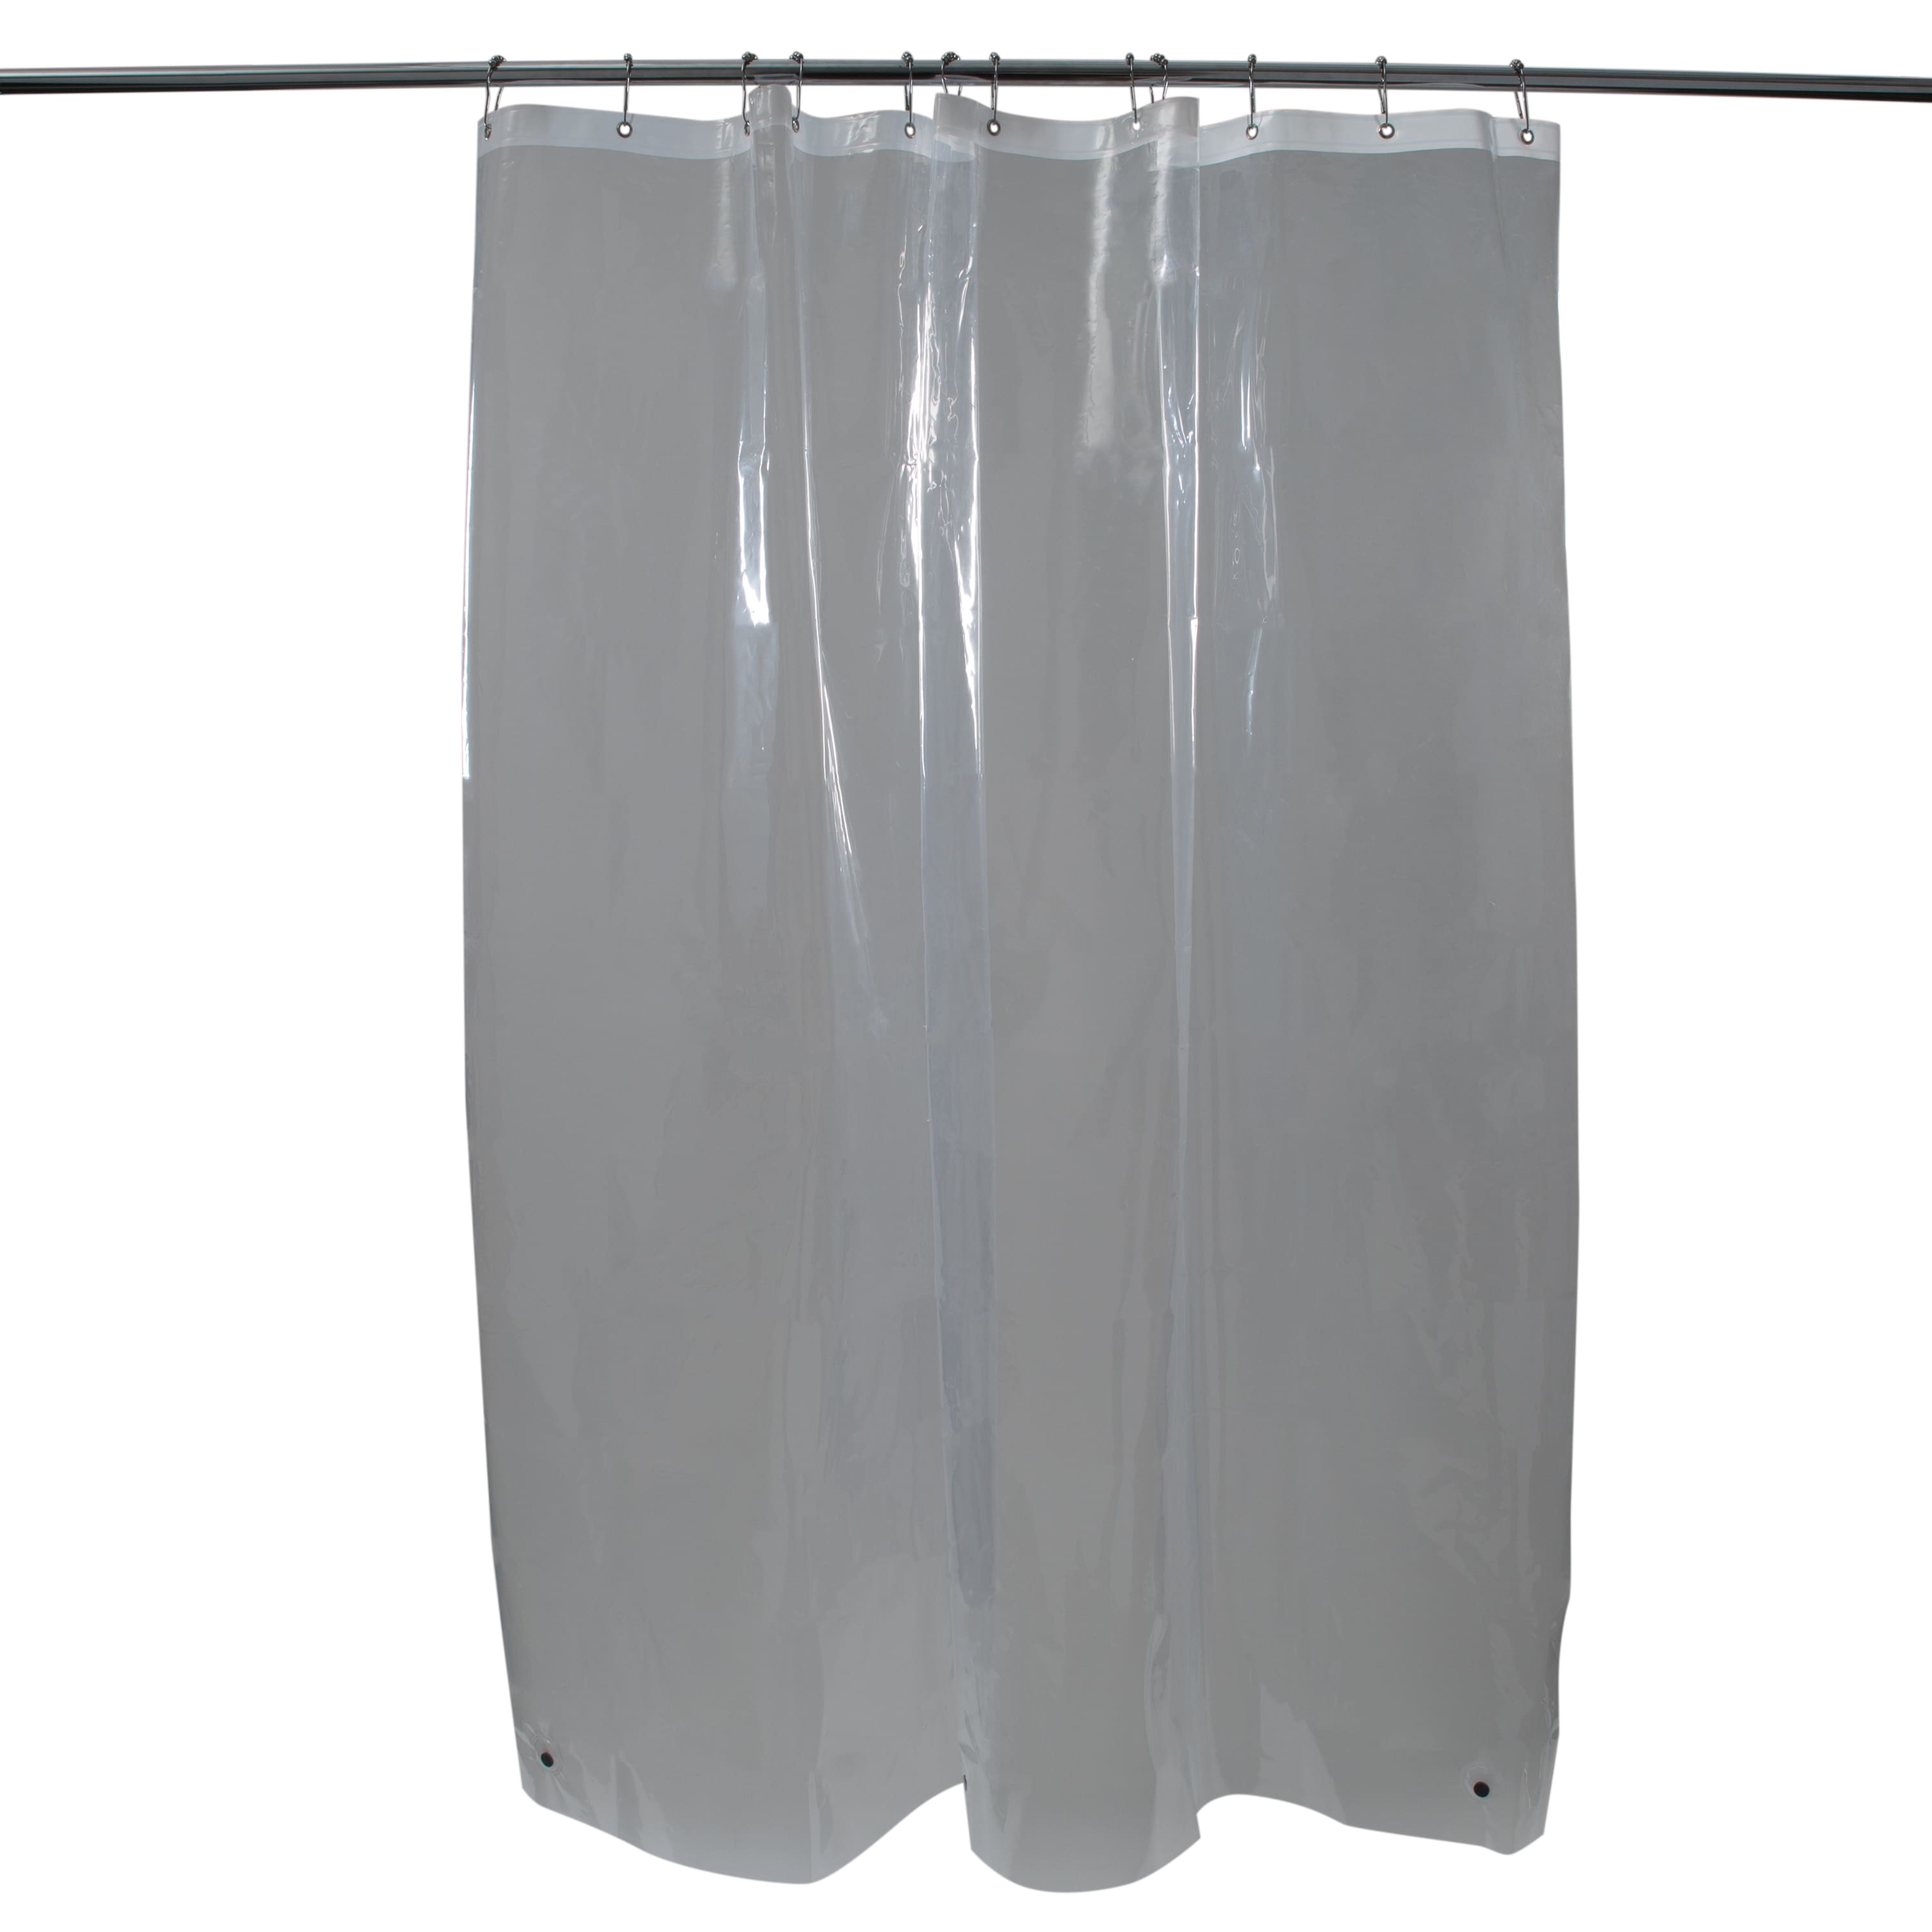 Goodears Clear Shower Curtain,Waterproof Shower Curtain Liner Plastic PEVA  with No Hooks,72x74 Inch,Washable